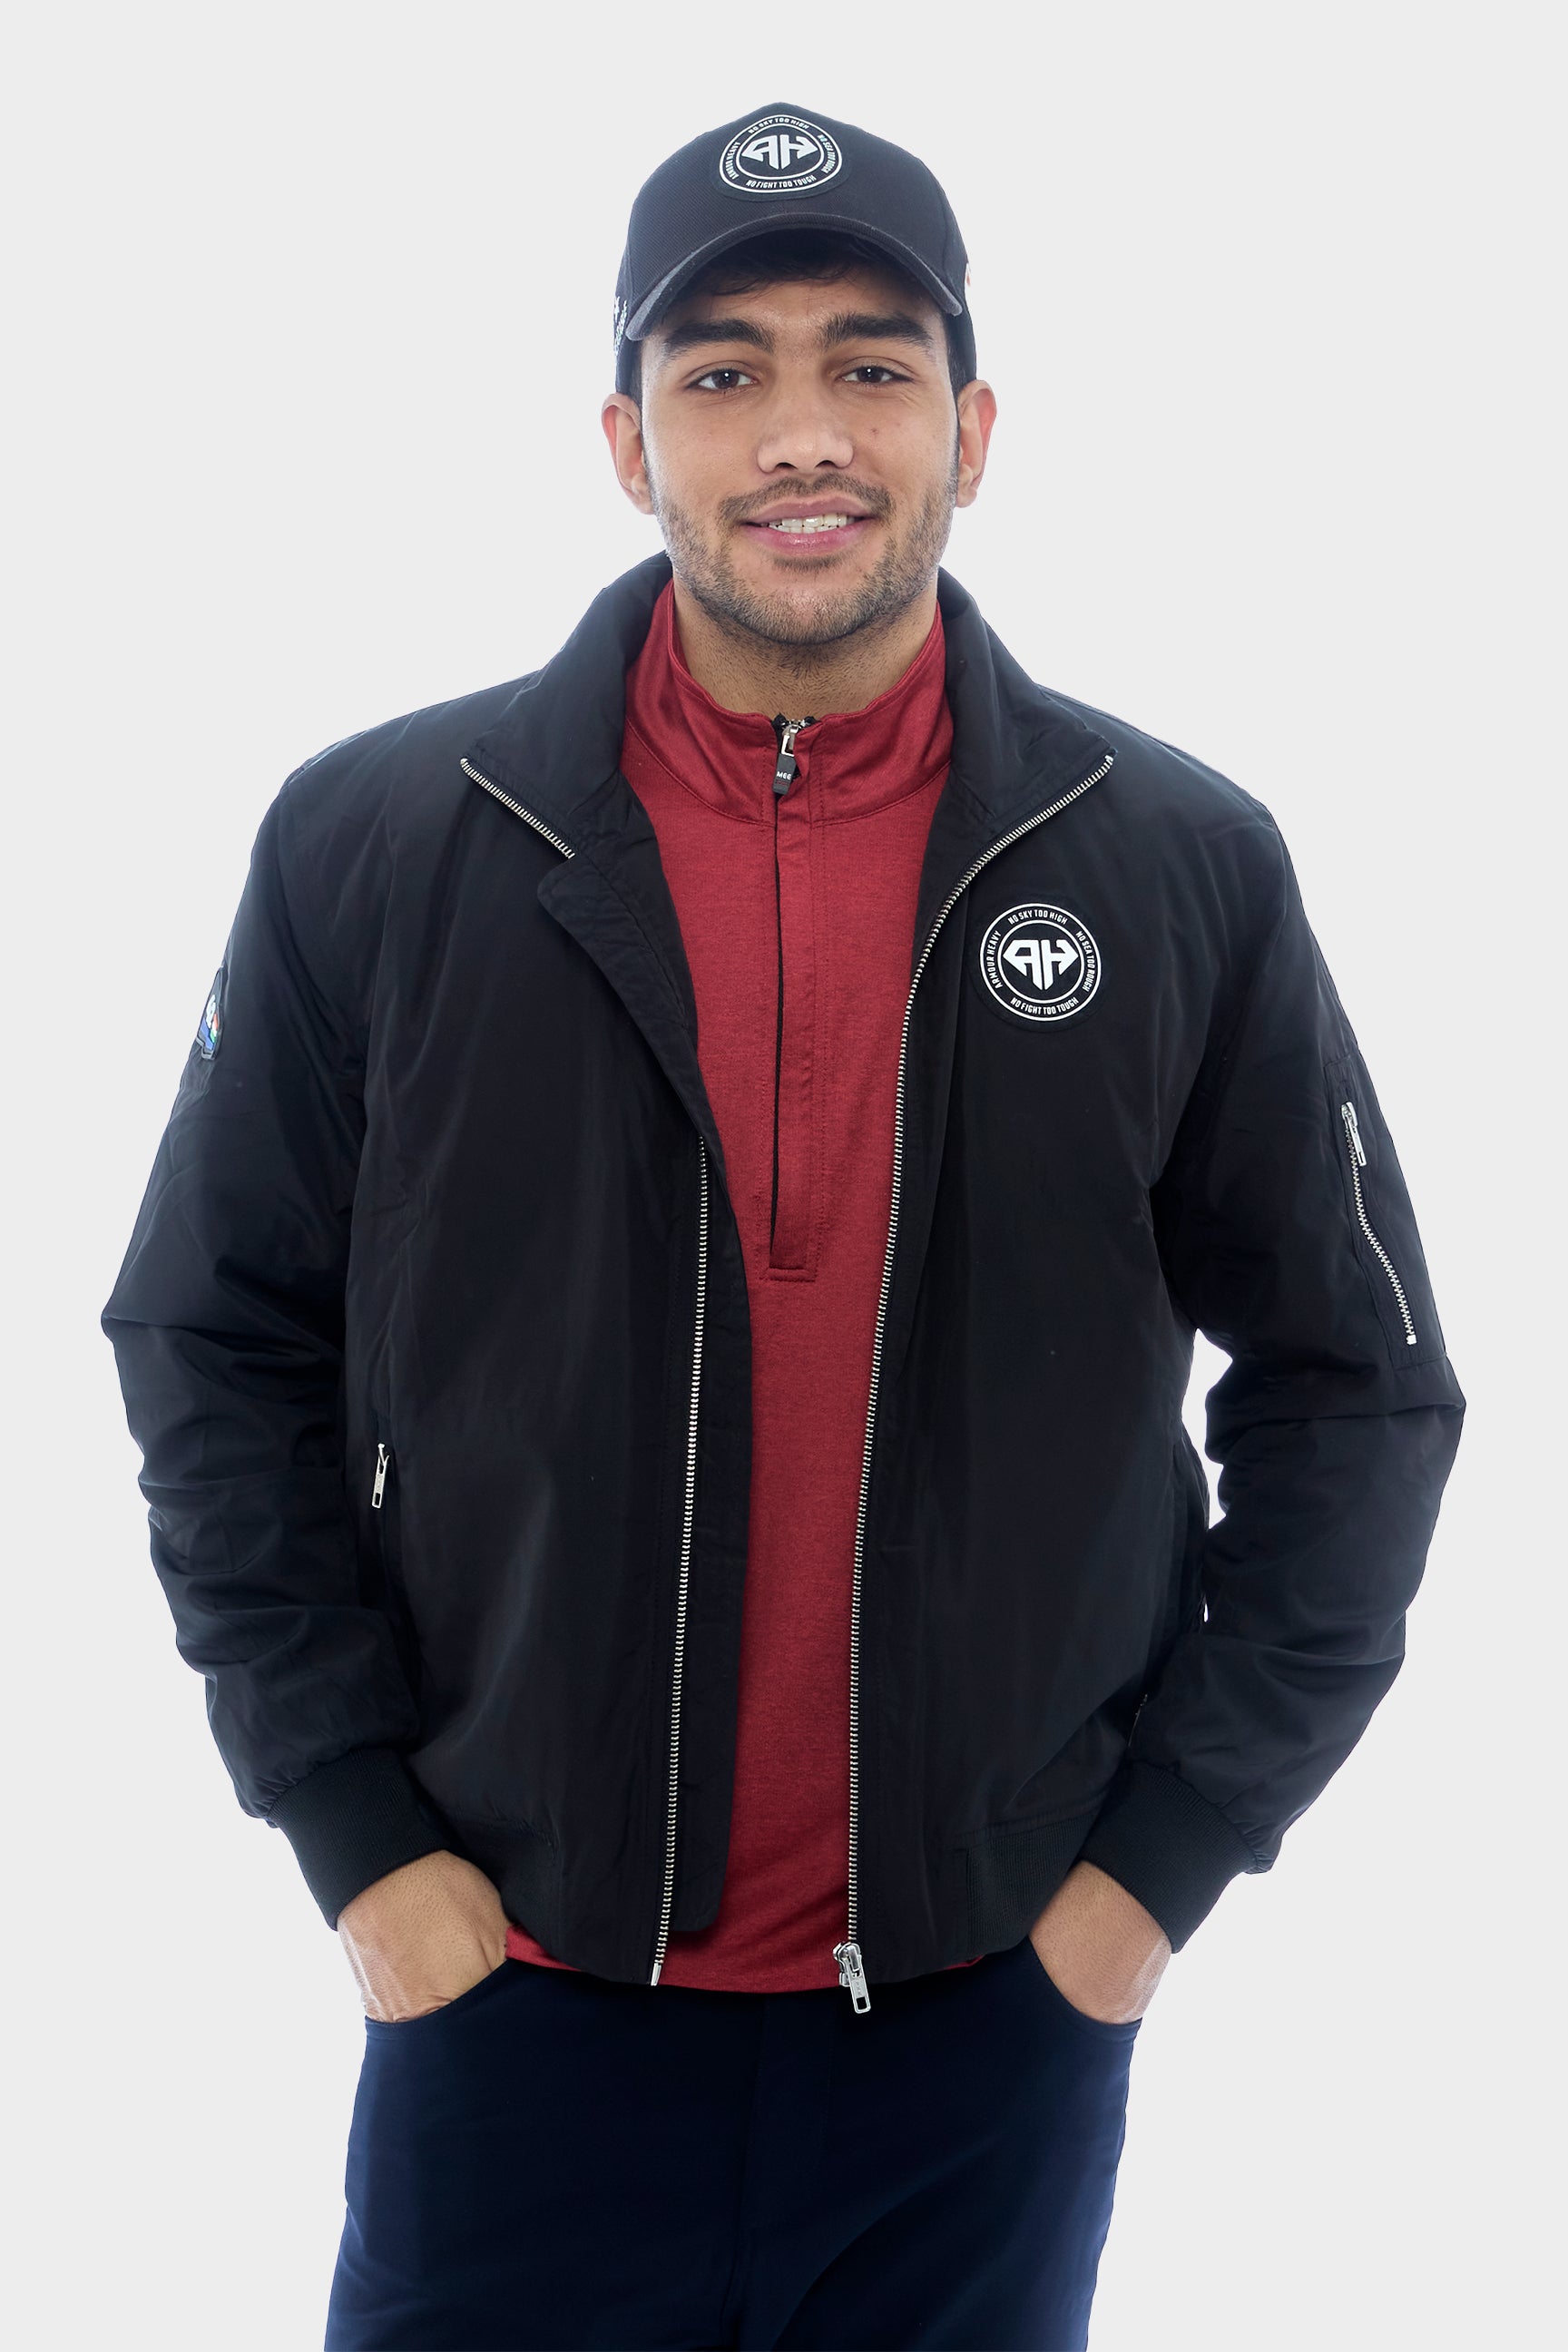 Buy Woodland Jackets For Men At Best Prices Online In India | Tata CLiQ